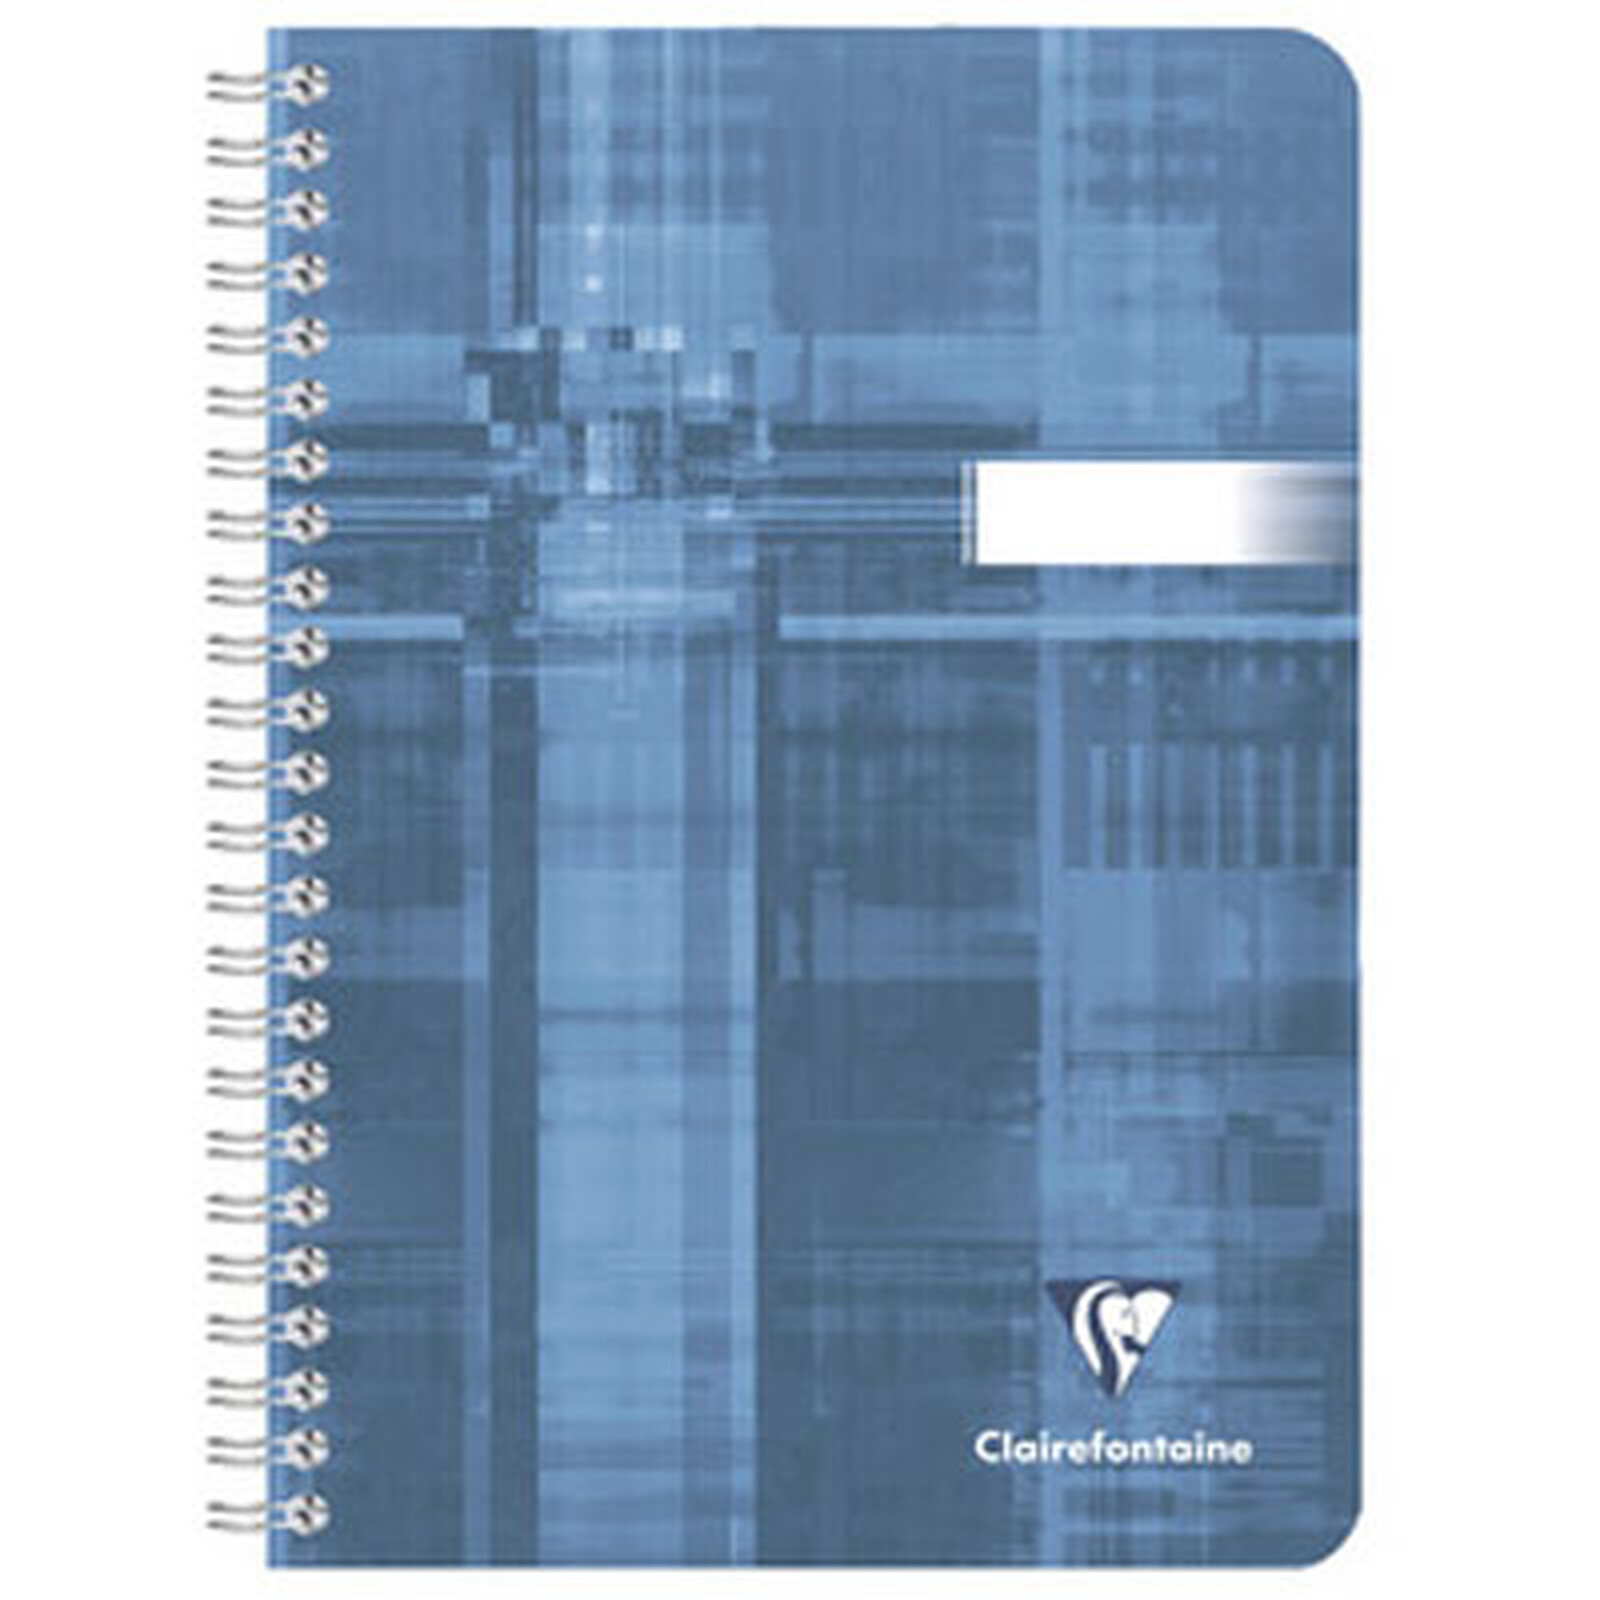 Recharge cahier - Format A5 14.8 x 21 cm - Exabook - Rhodia - 160